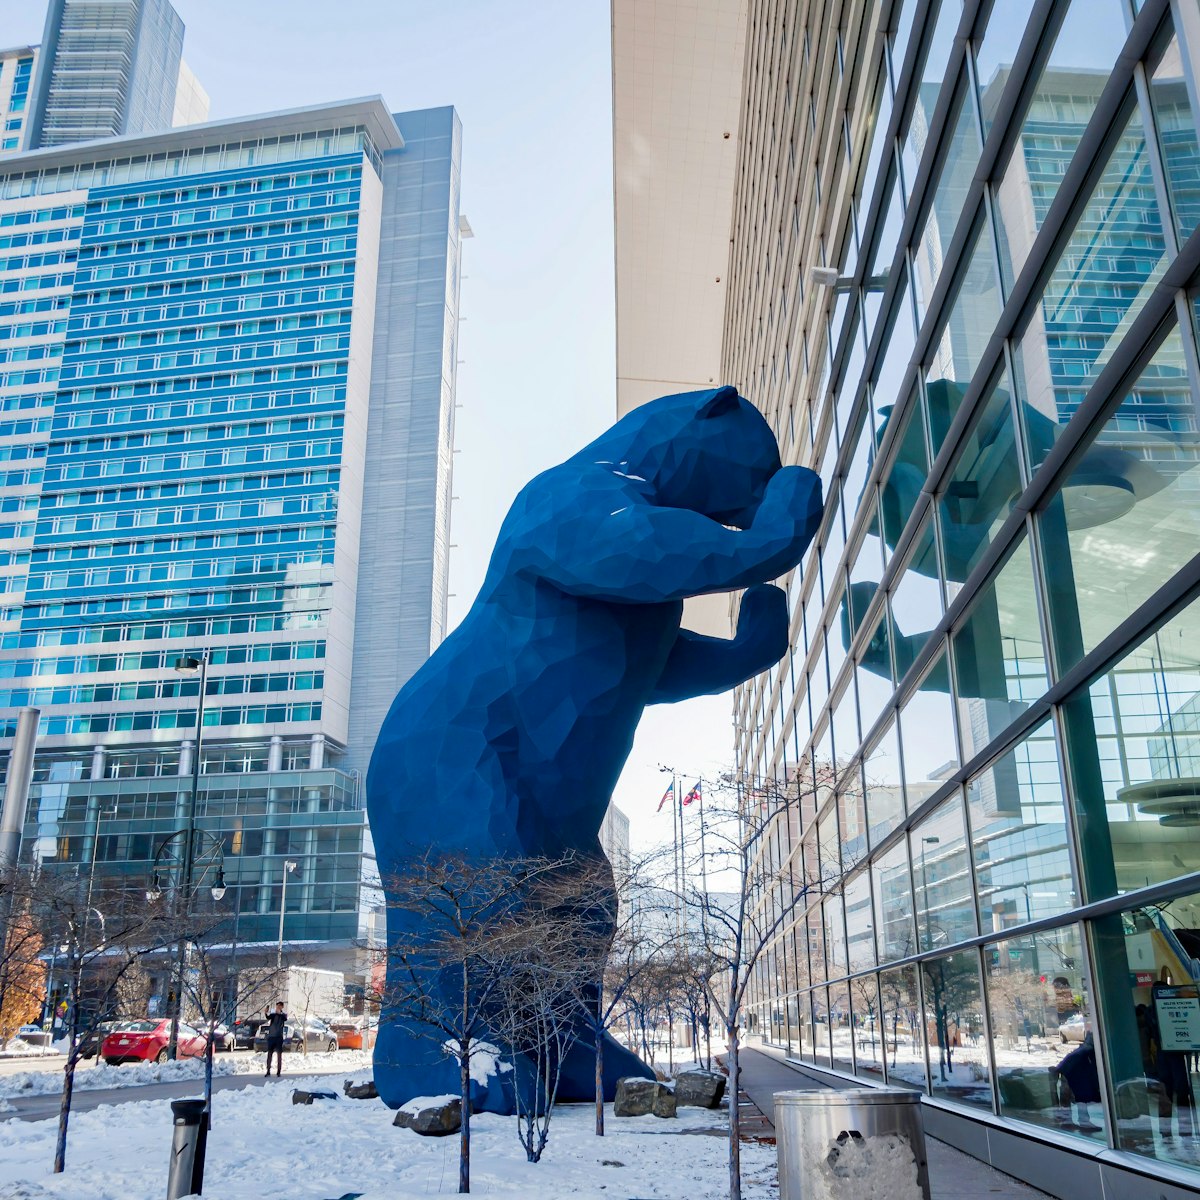 Morning view of the famous big Blue Bear by the Convention Center in Denver, Colorado.